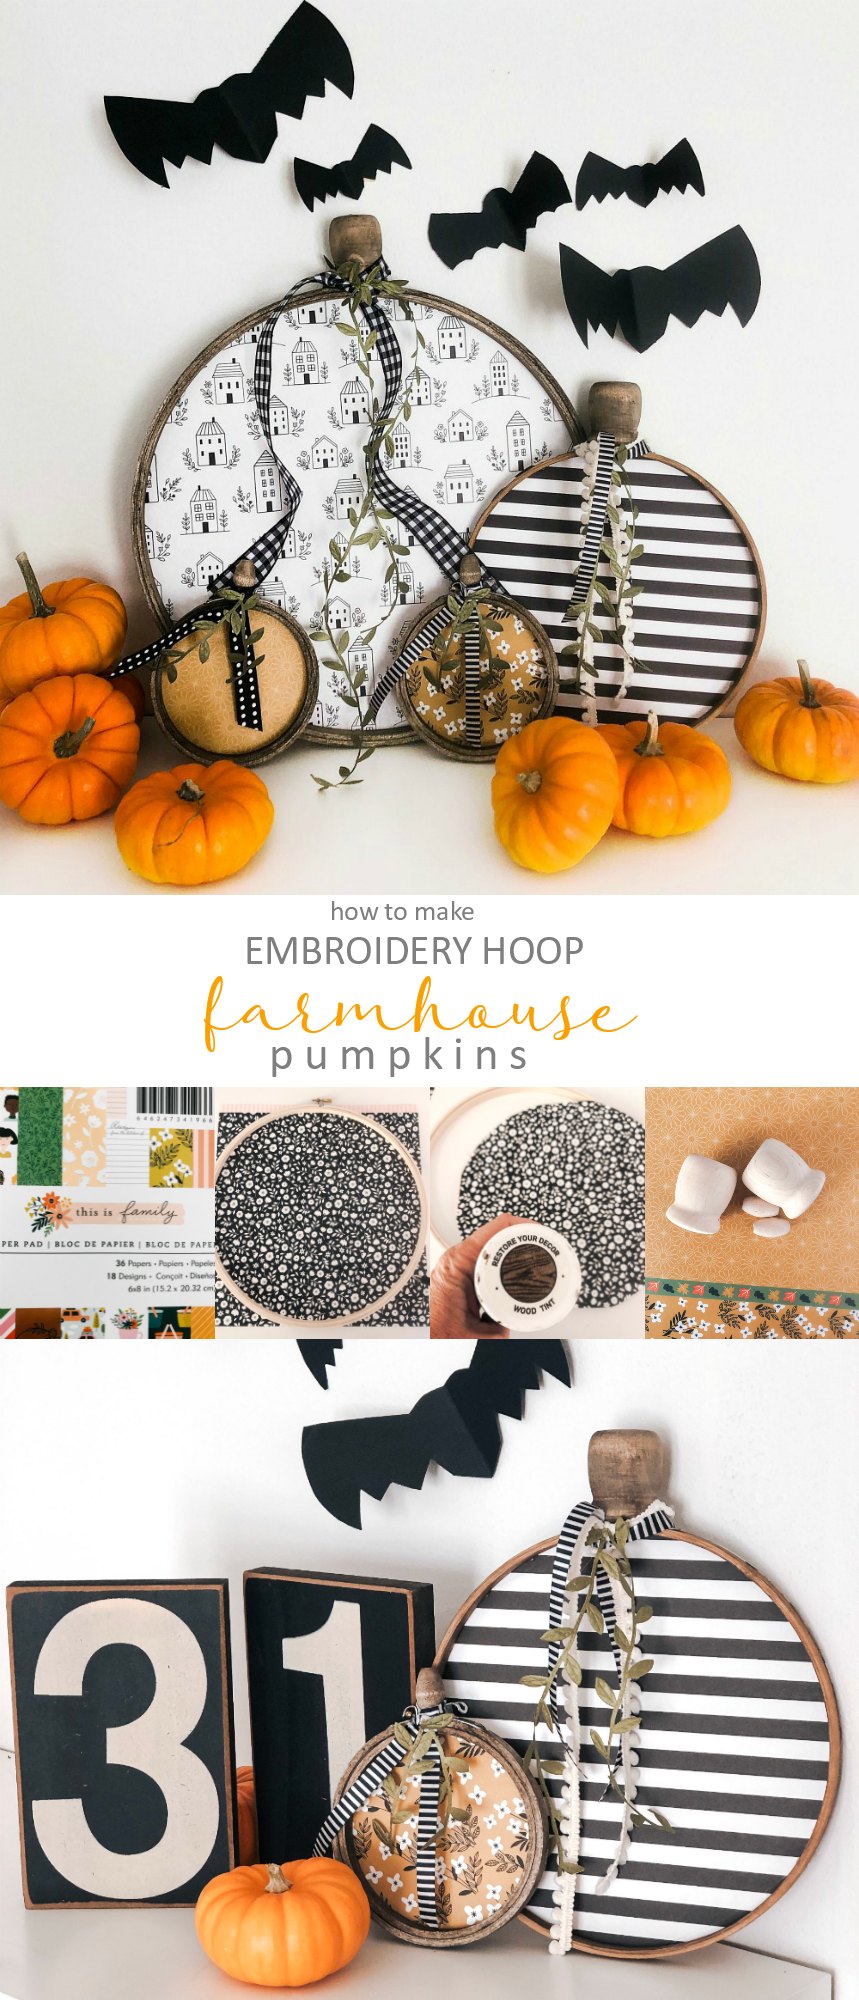 Embroidery Hoop Farmhouse Pumpkins. Turn embroidery hoops pretty and paper into adorable pumpkins you can display all fall long! 